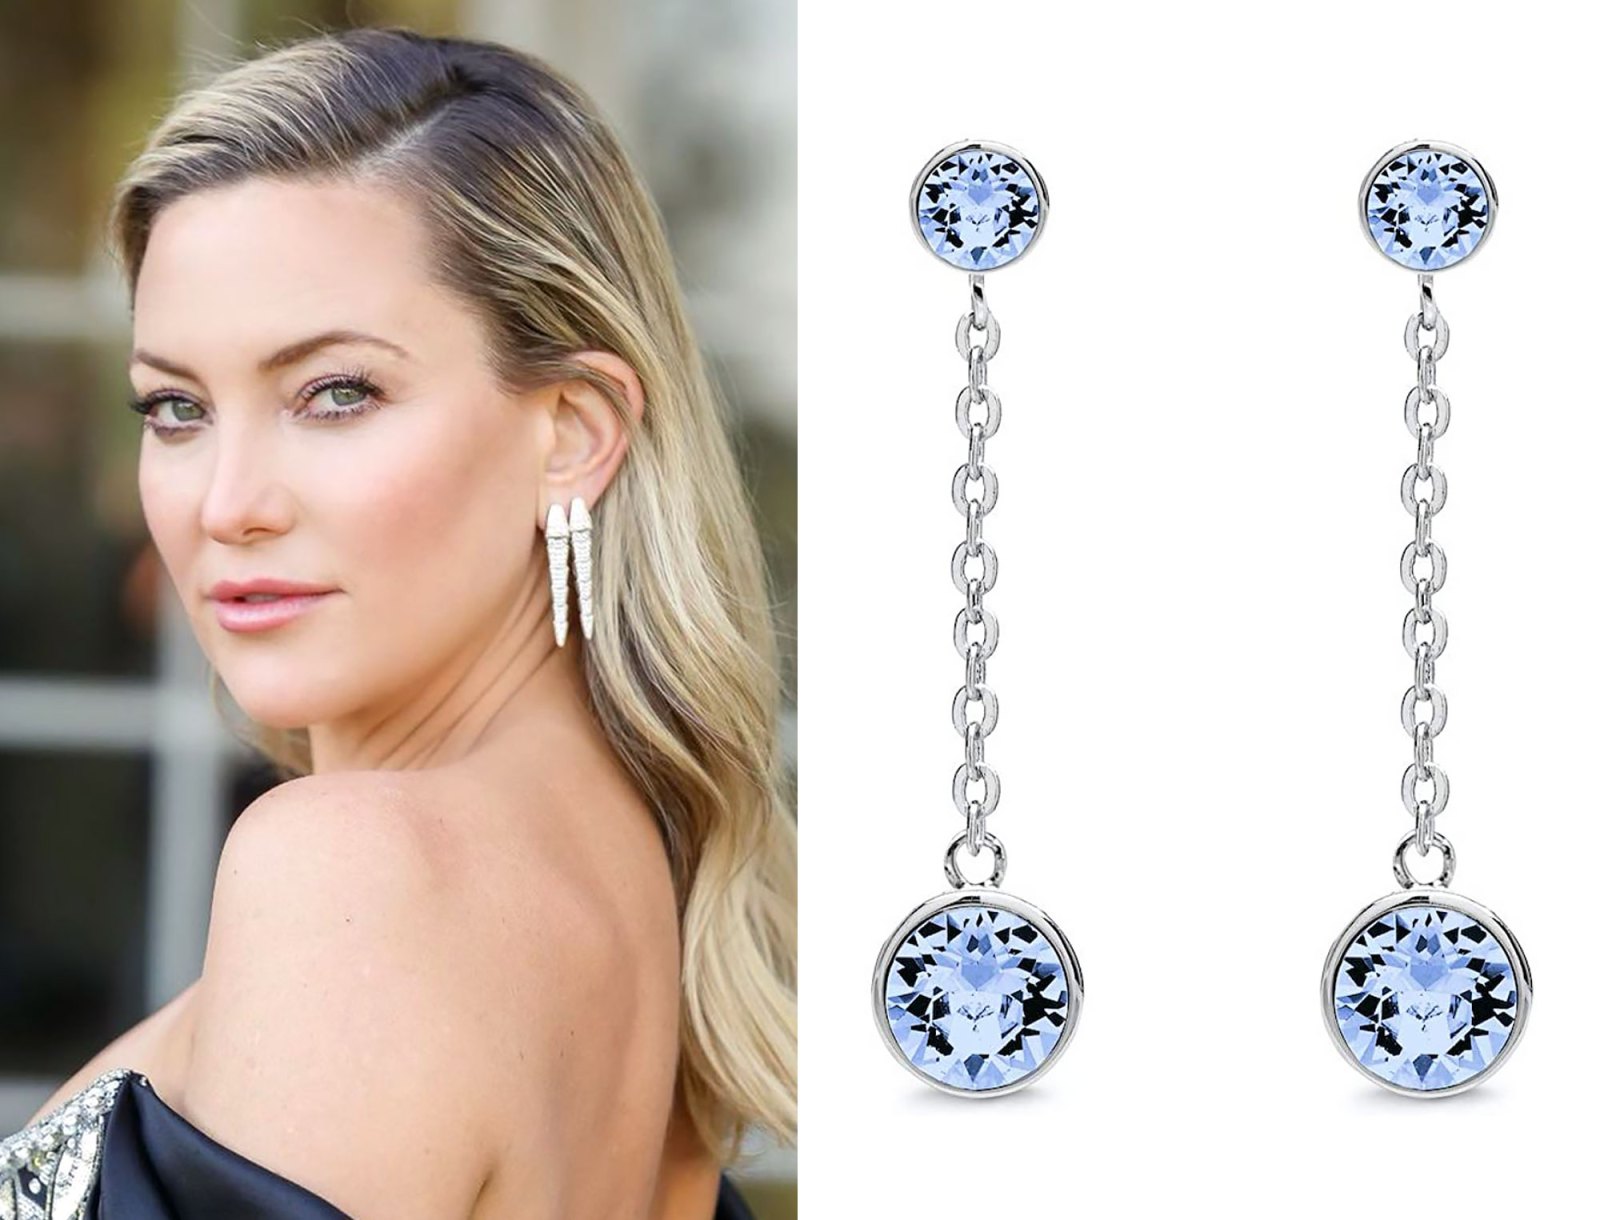 How to Shop the Biggest 2021 Golden Globes Jewelry Trends for Less